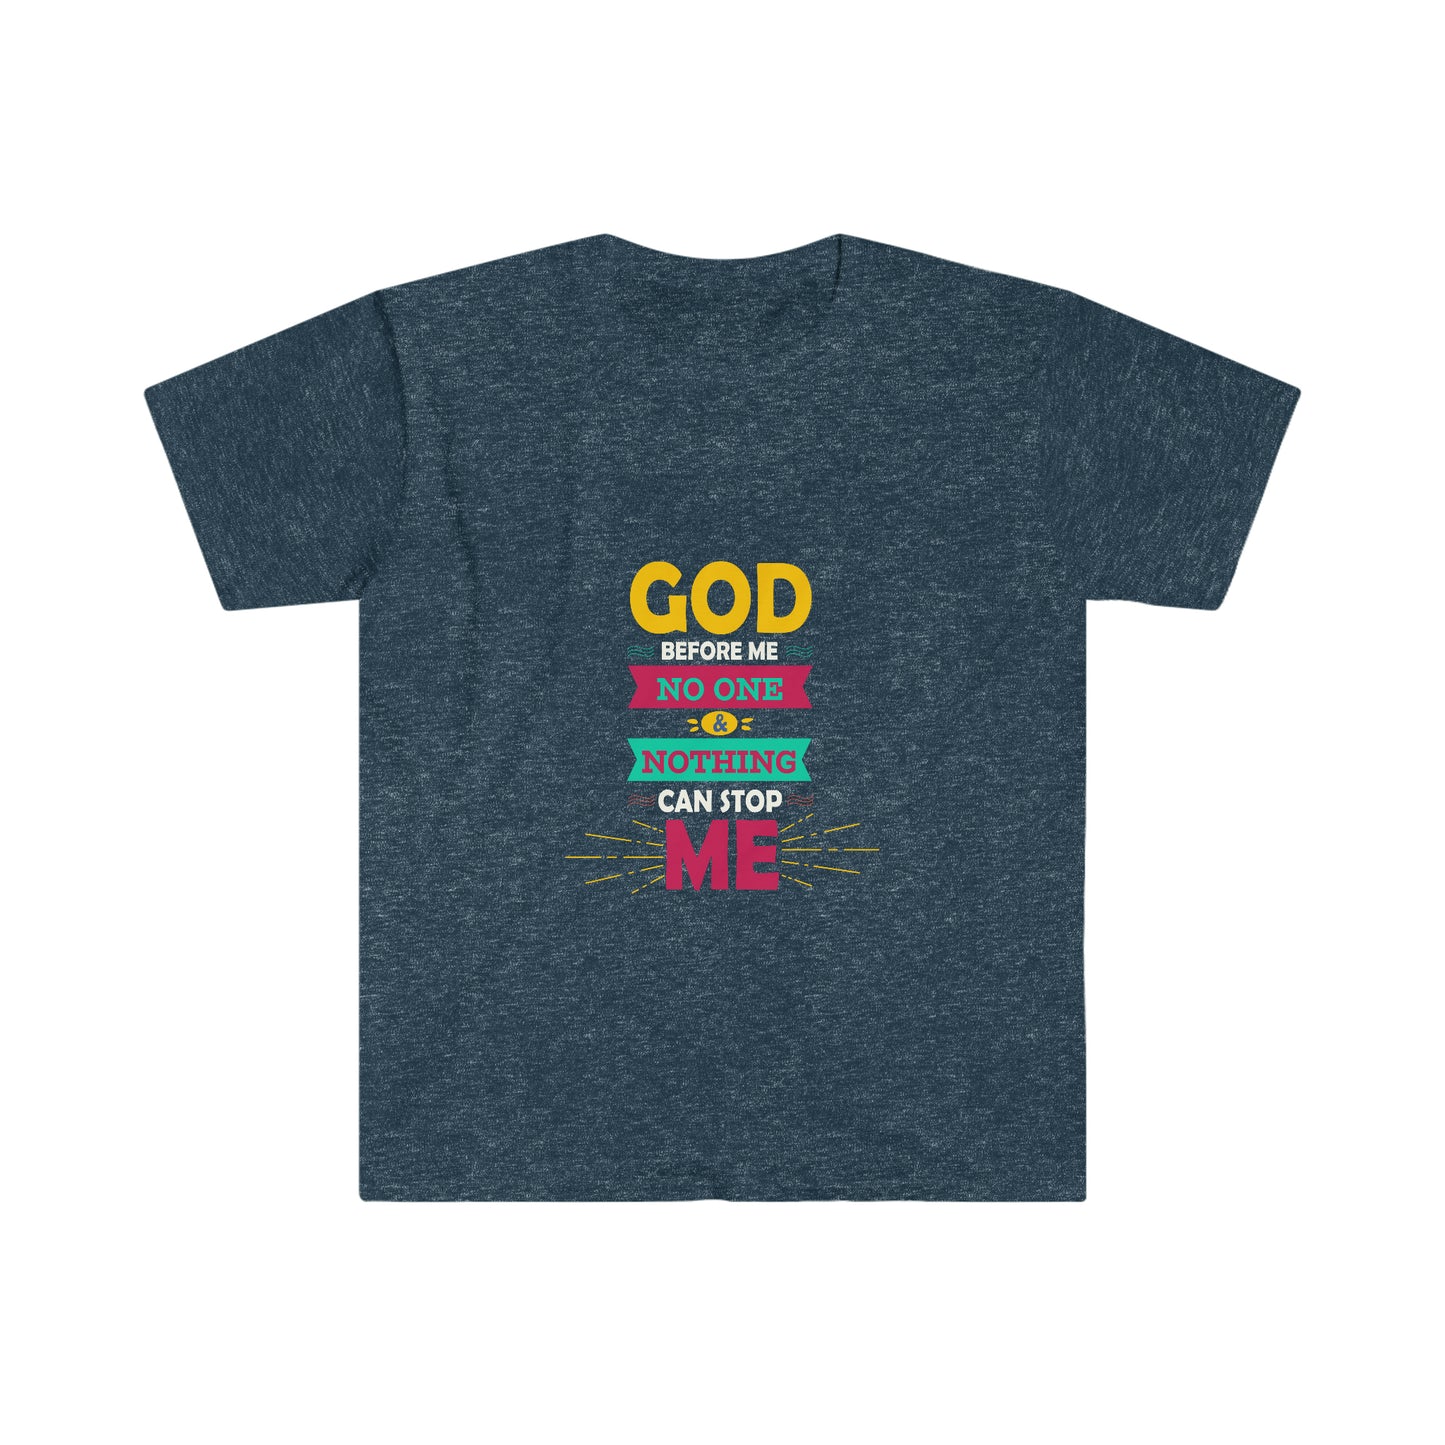 God Before Me No One & Nothing Can Stop Me Unisex T-shirt